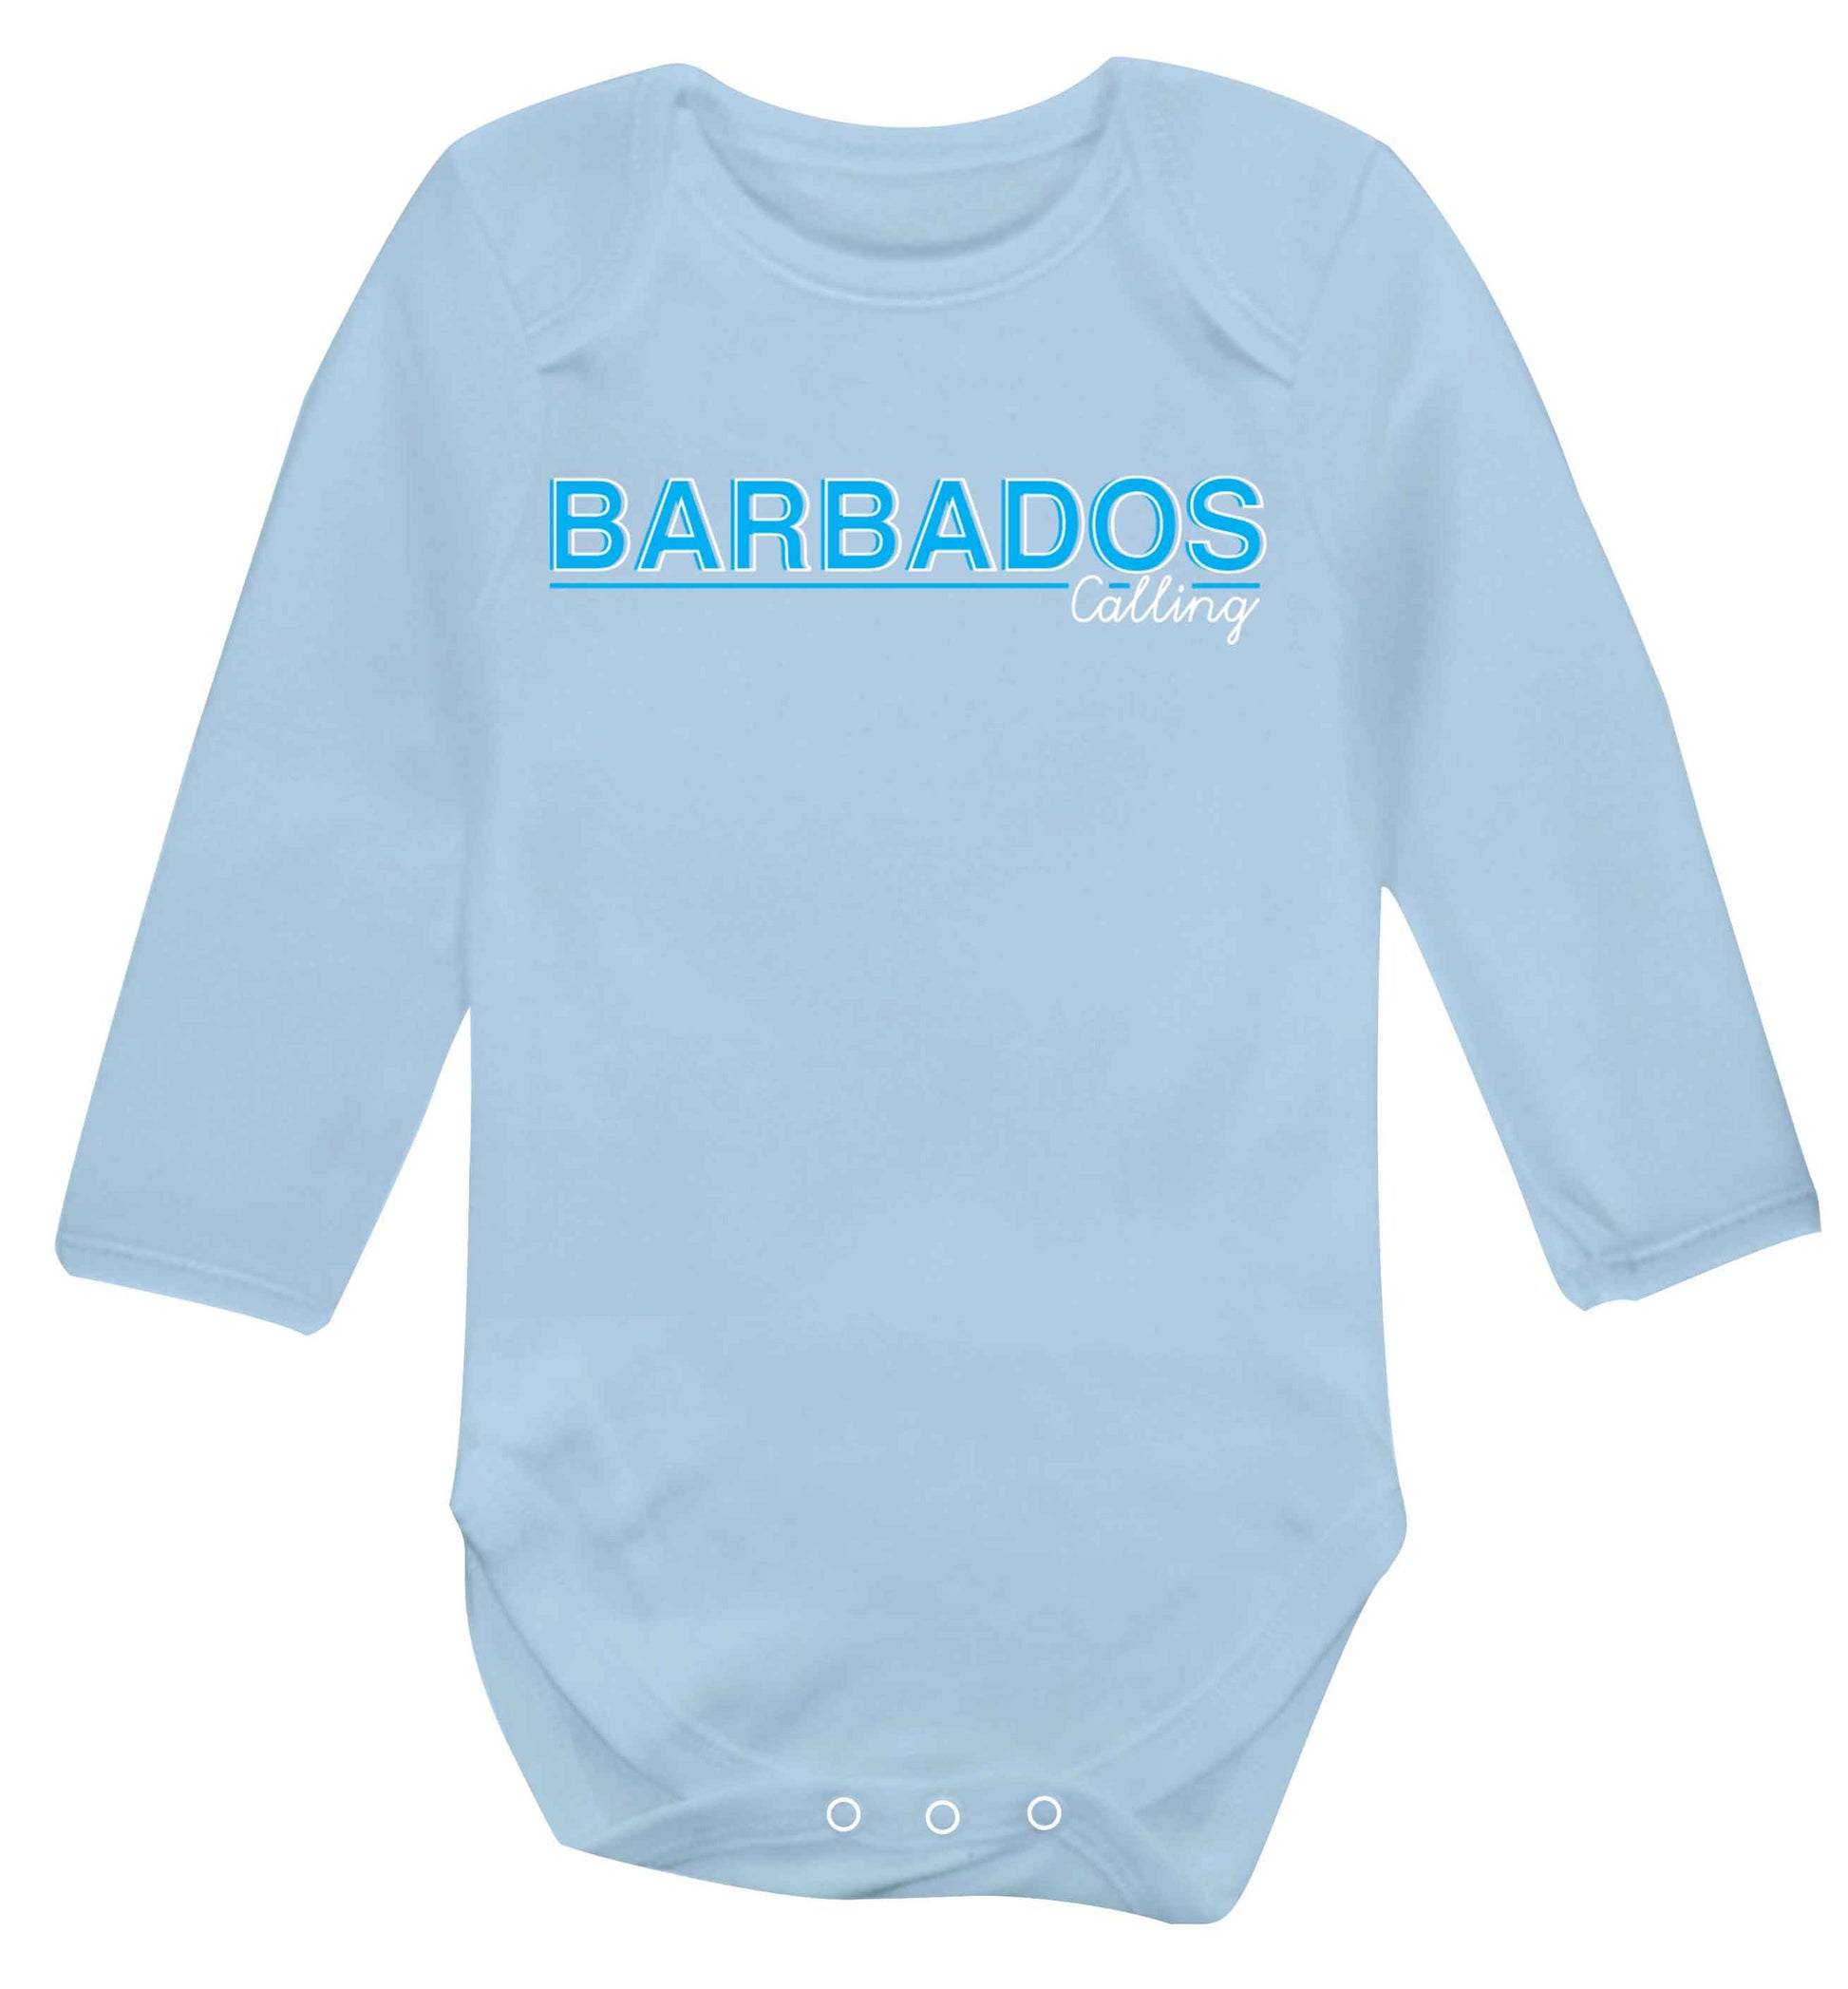 Barbados calling Baby Vest long sleeved pale blue 6-12 months